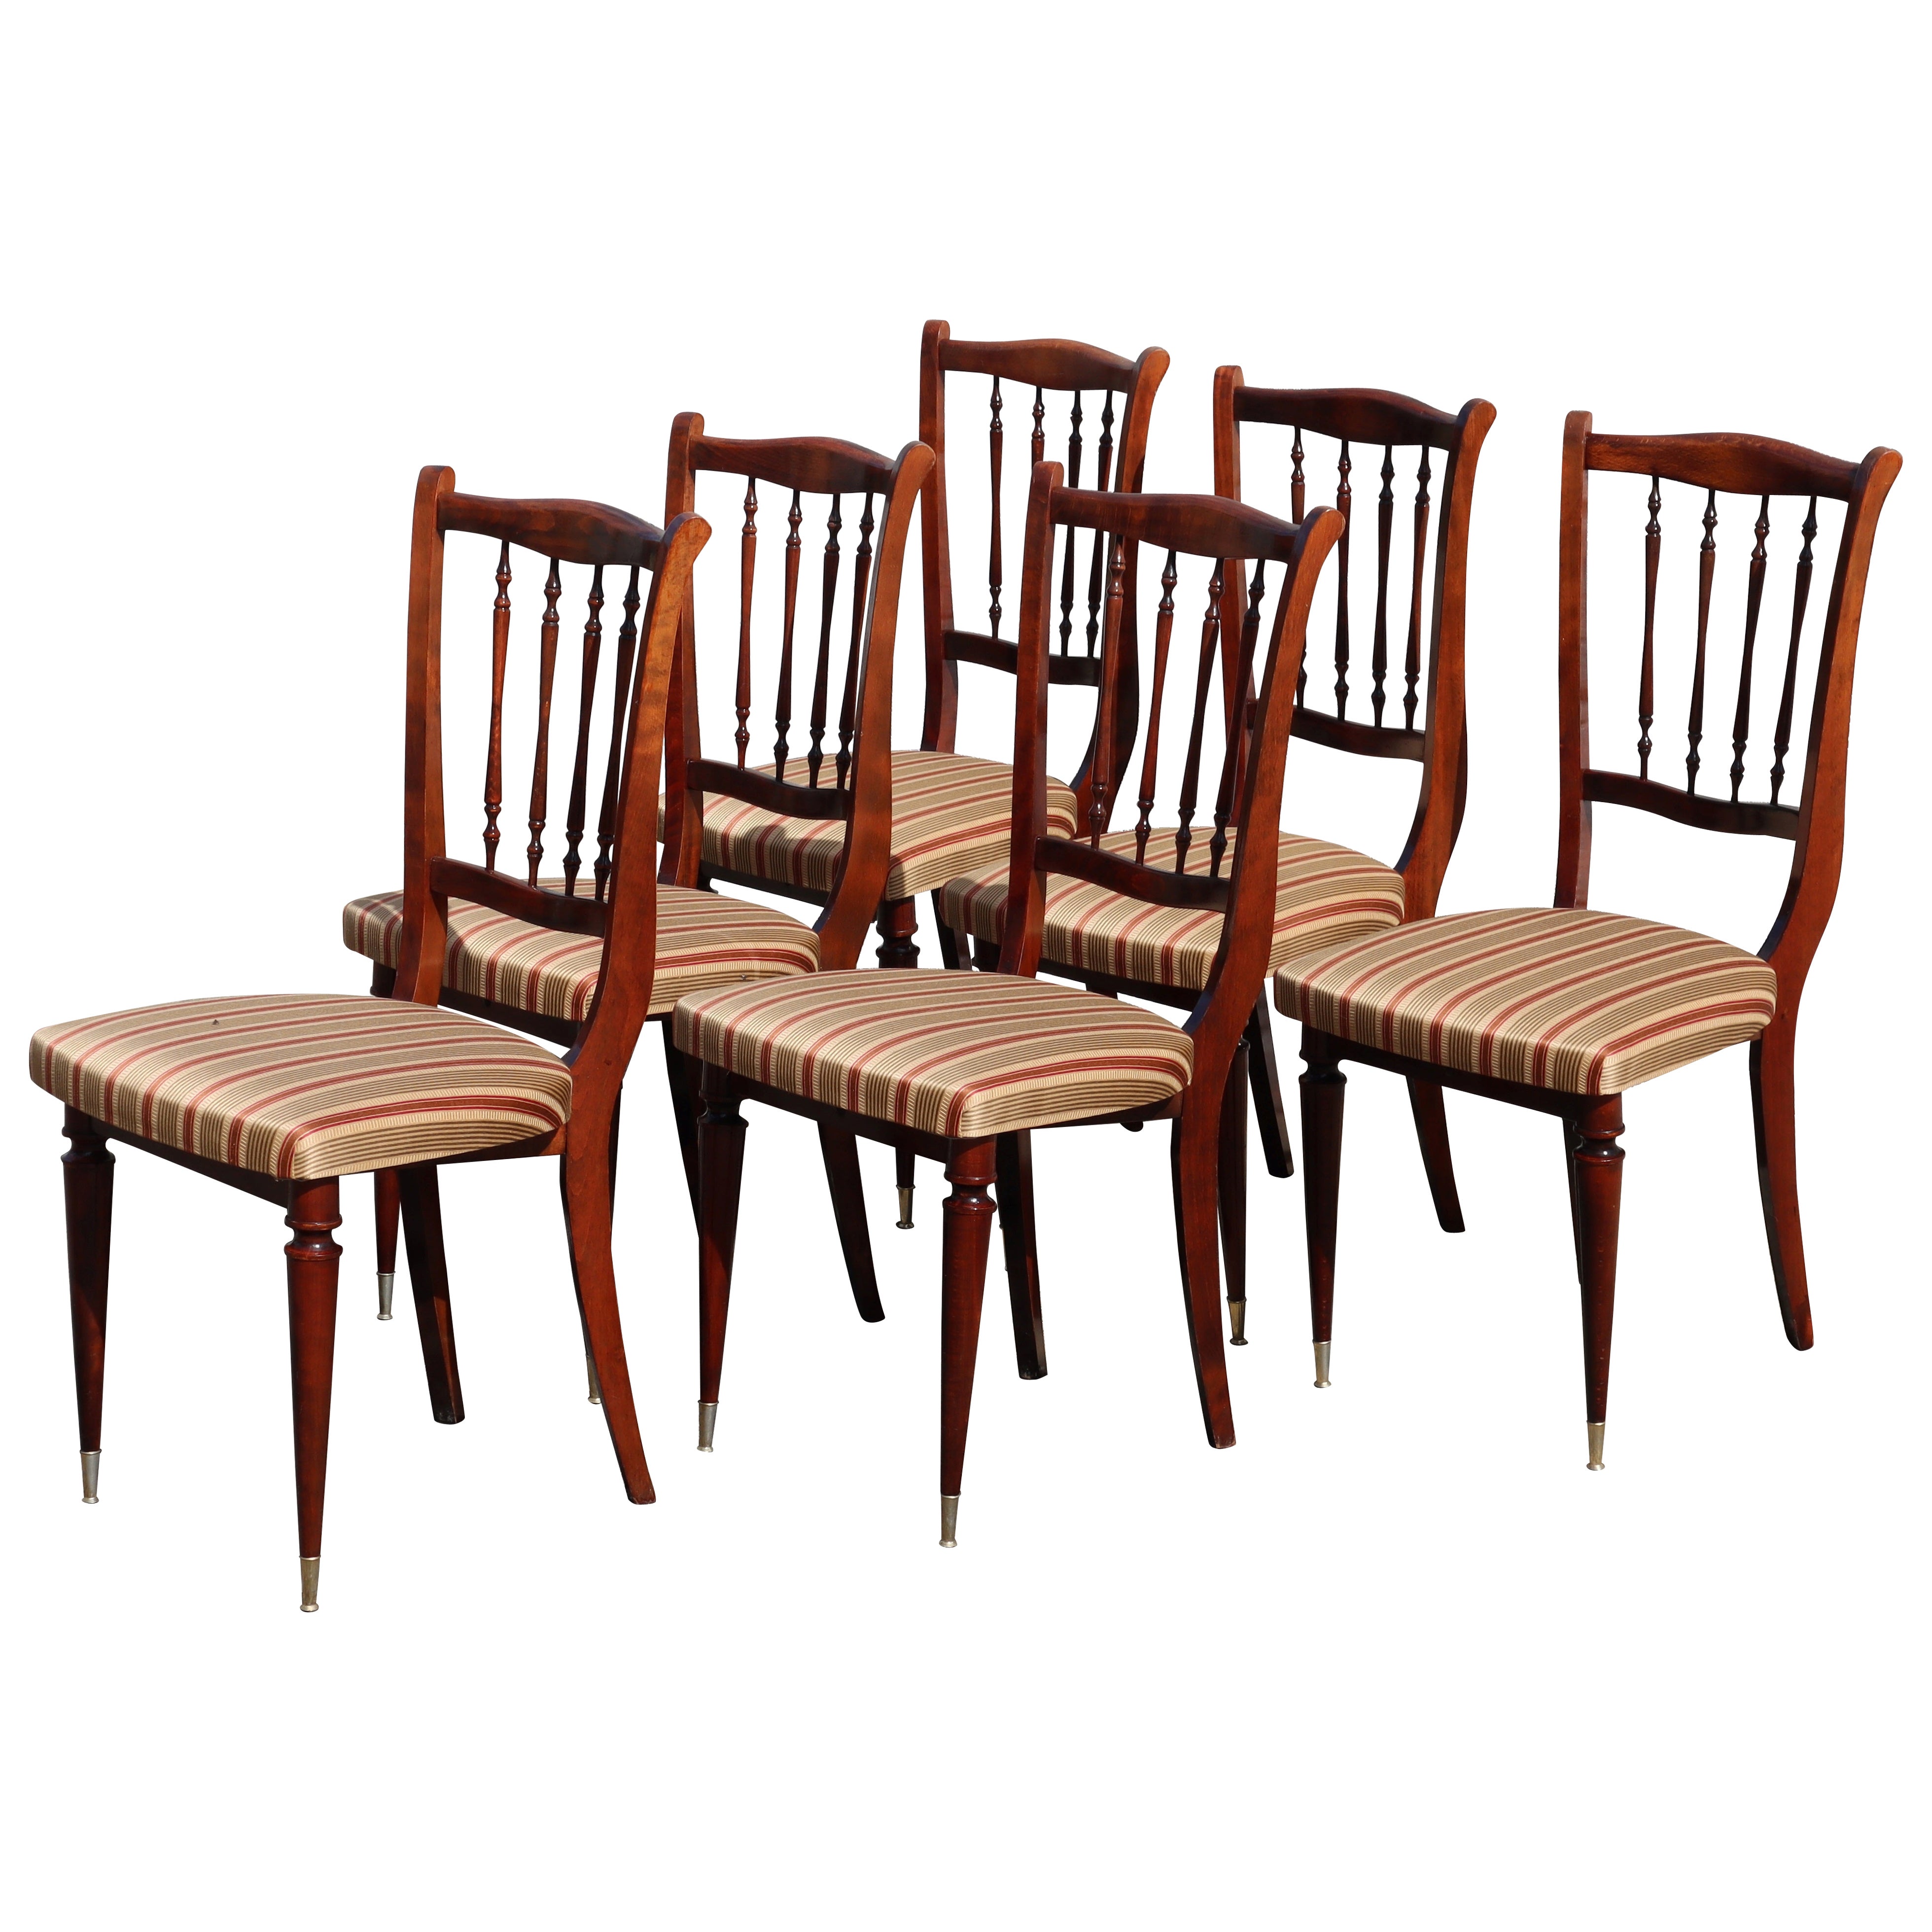 French Mid-Century Dining Chairs-Set of 6 upholstered Mahogany Dining Chairs-60s